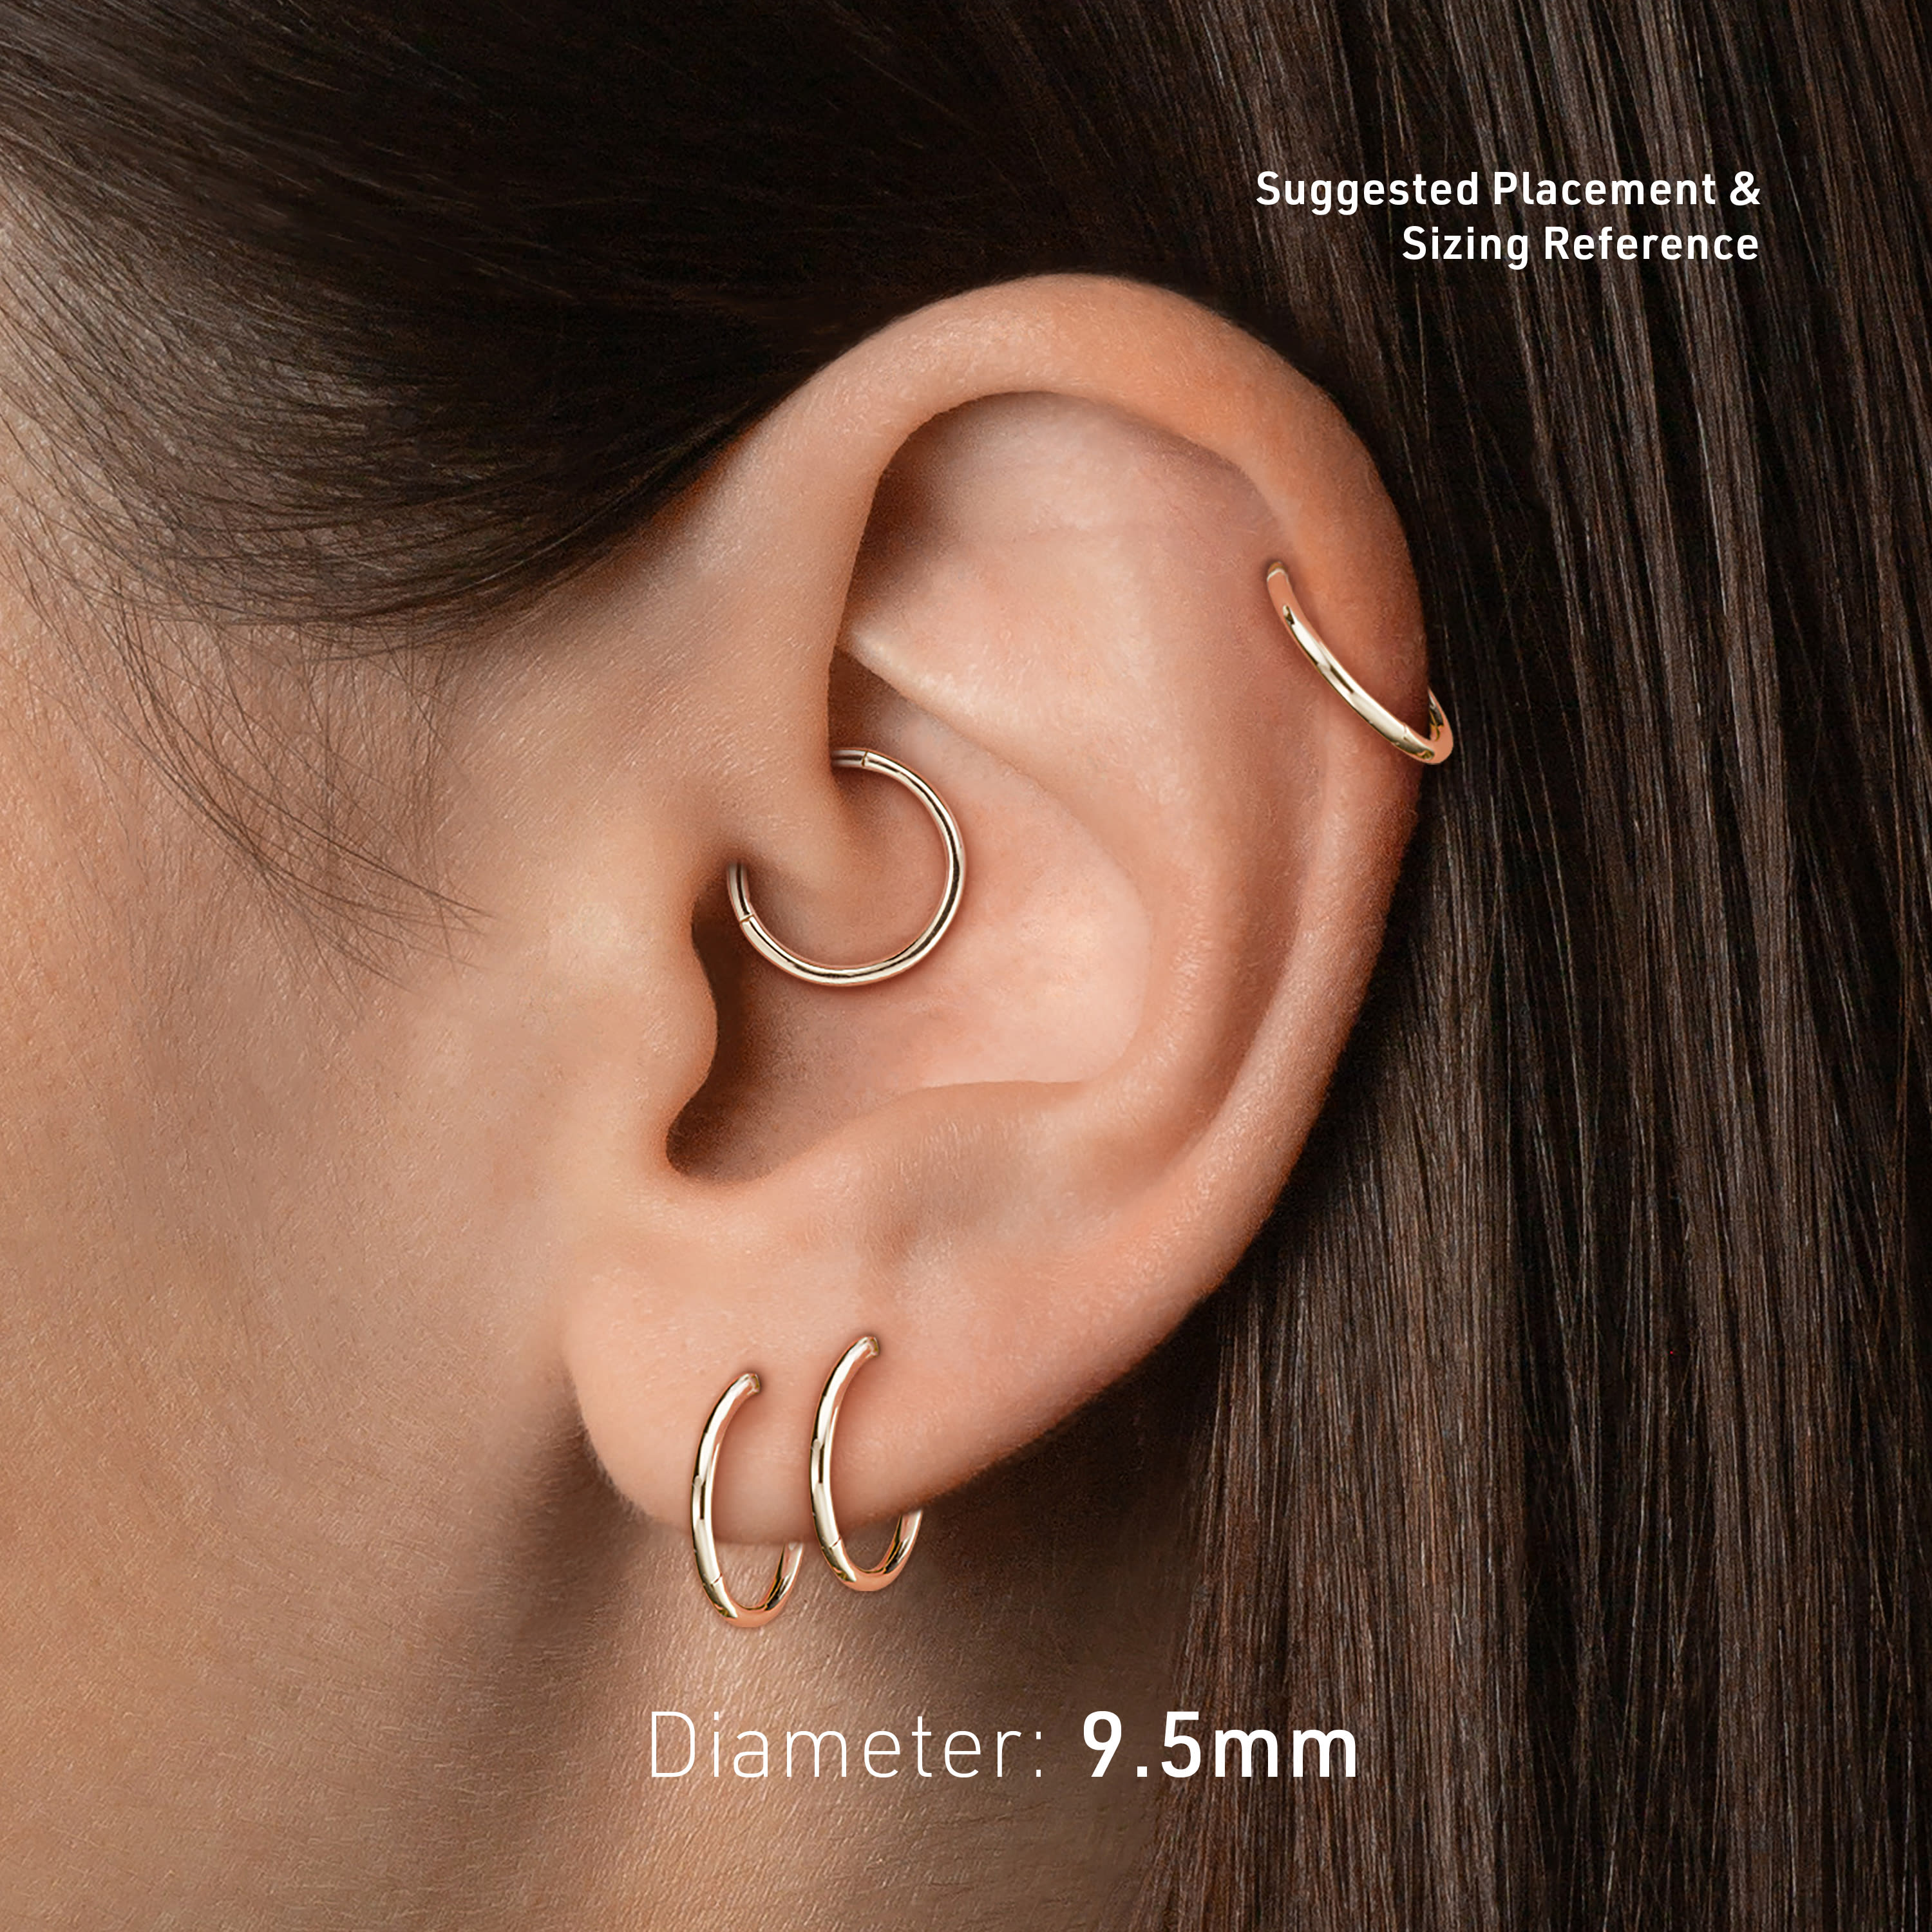 Suggested earlobe or cartilage placement for 9.5mm hoop earring size guide